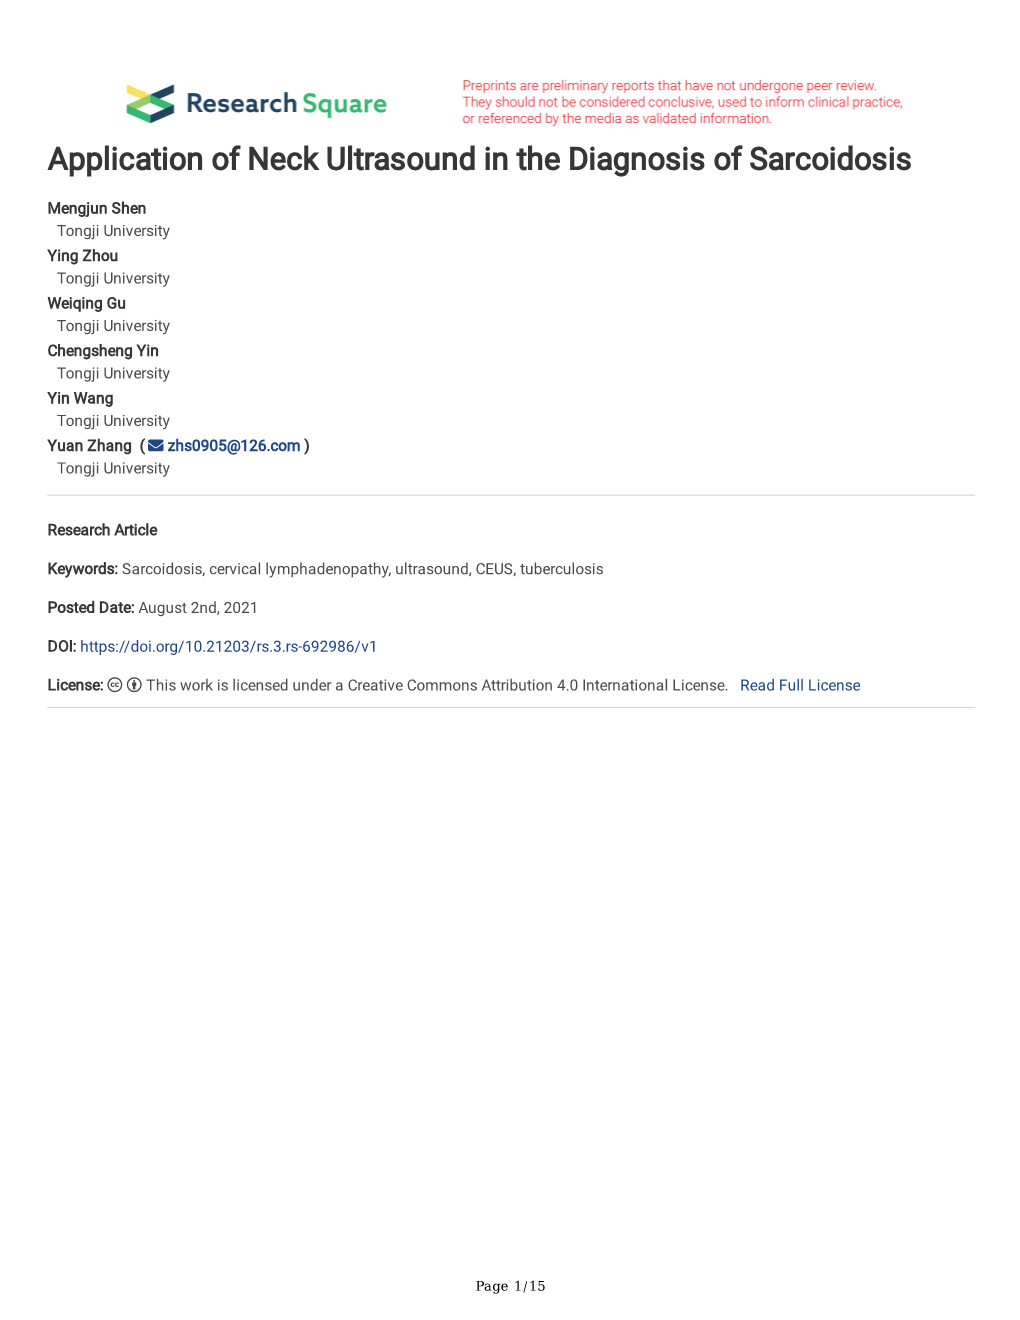 Application of Neck Ultrasound in the Diagnosis of Sarcoidosis